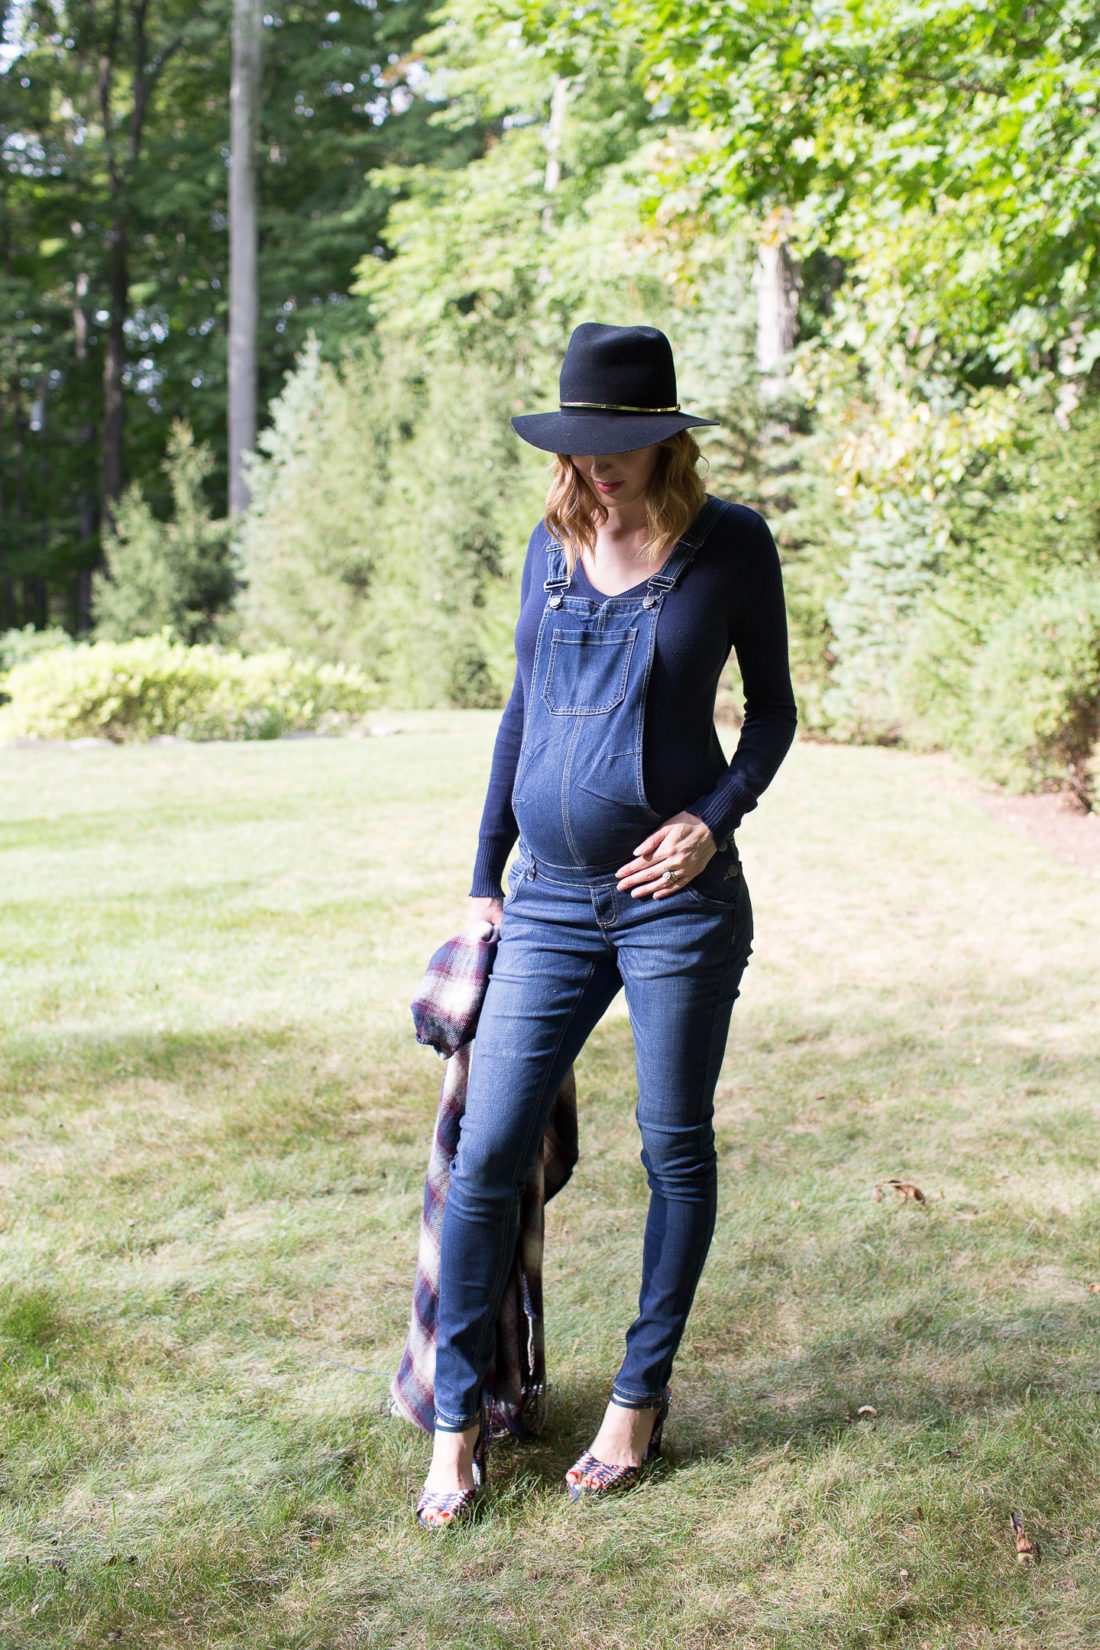 Eva Amurri Martino of lifestyle blog Happily Eva After standing in her yard in maternity overalls, a navy felt hat, and a plaid poncho at her home in connecticut